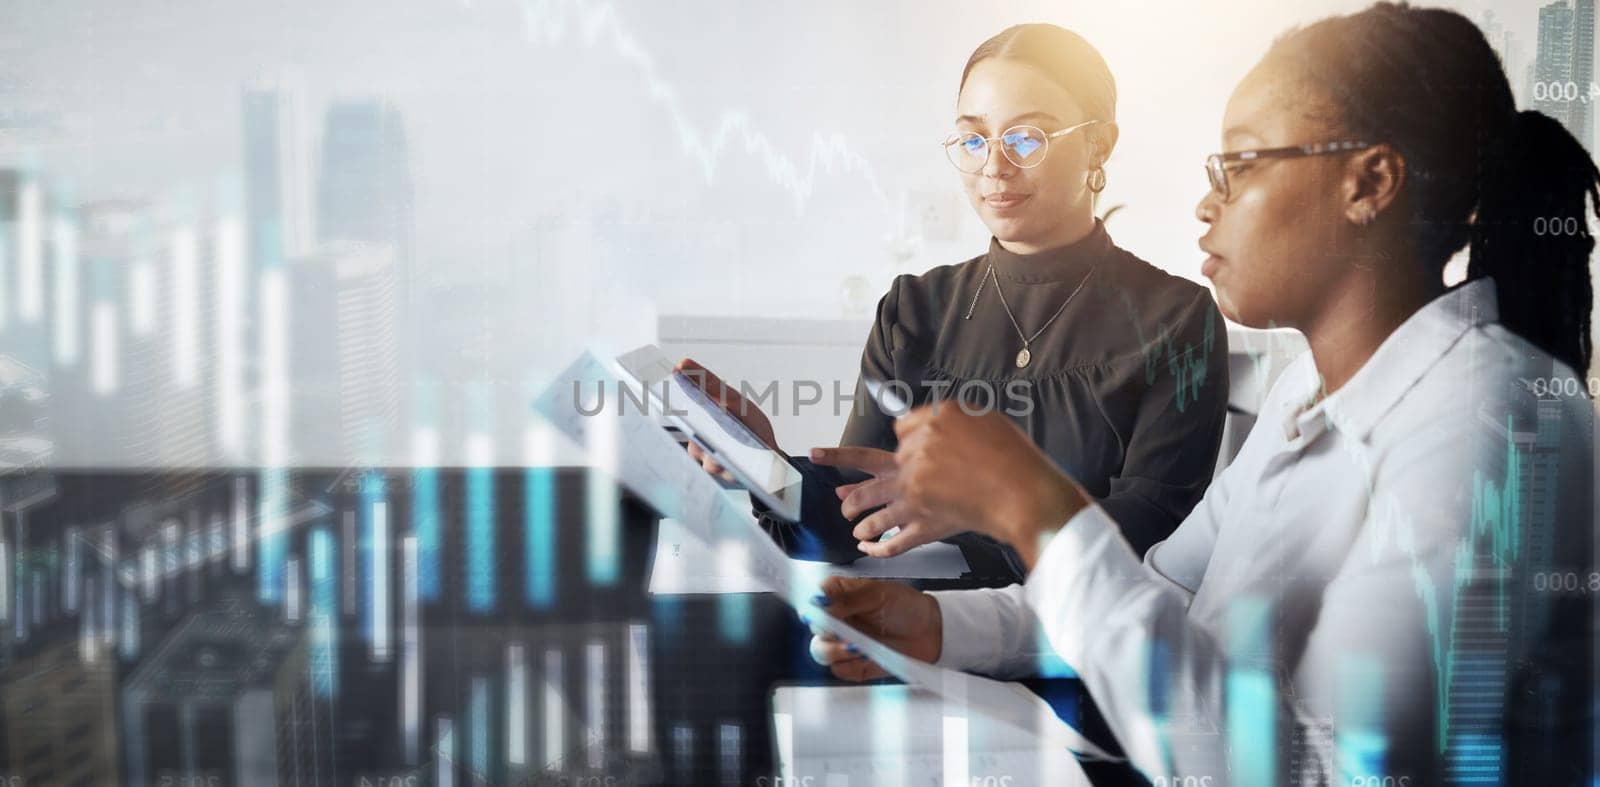 Women, tablet or documents in futuristic finance management, stock market trading or investment data analysis. Financial workers, abstract 3d or chart analytics, teamwork collaboration or technology.